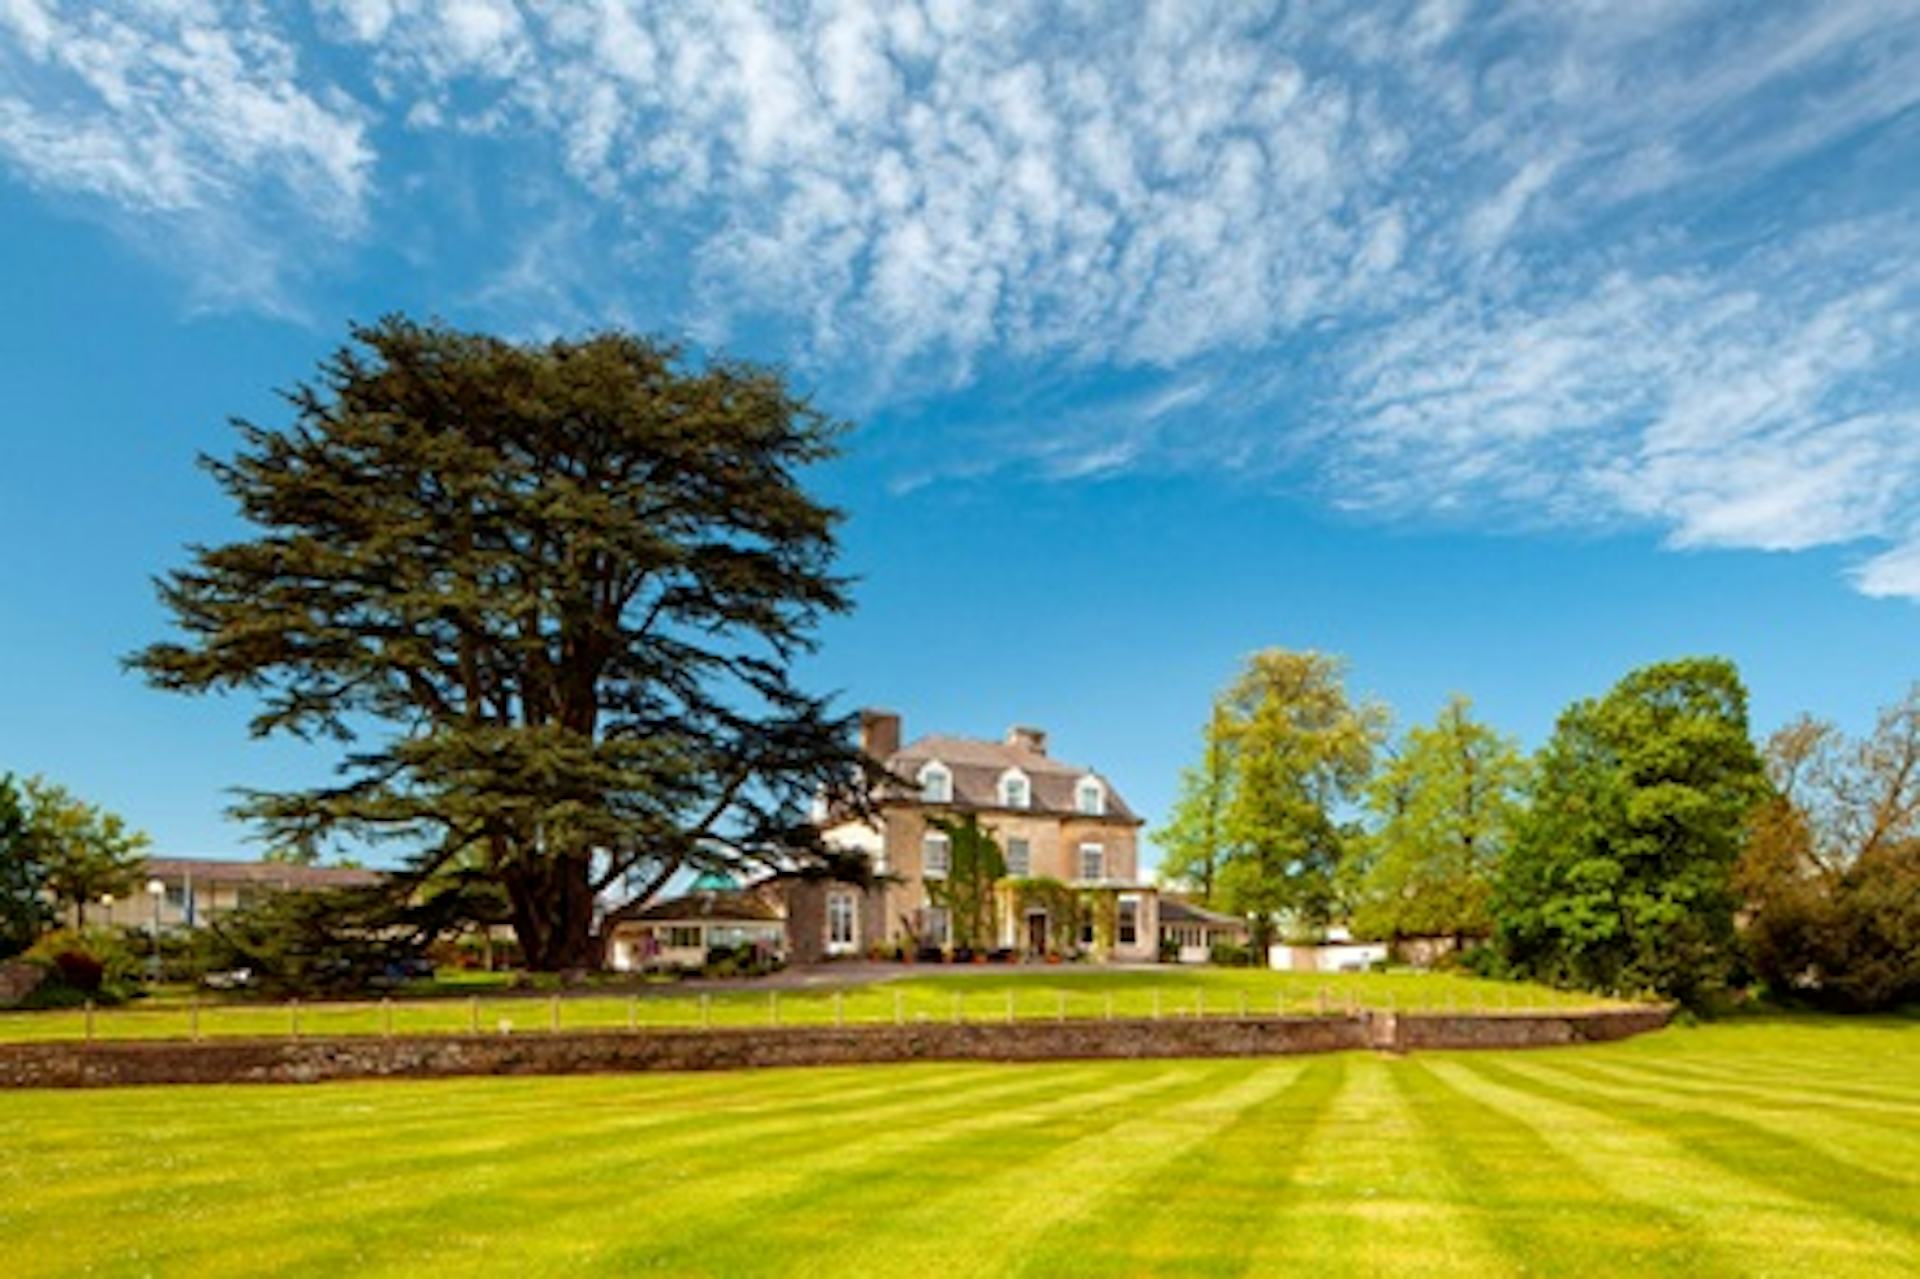 Two Night Break for Two at The Grange Hotel, Bristol North